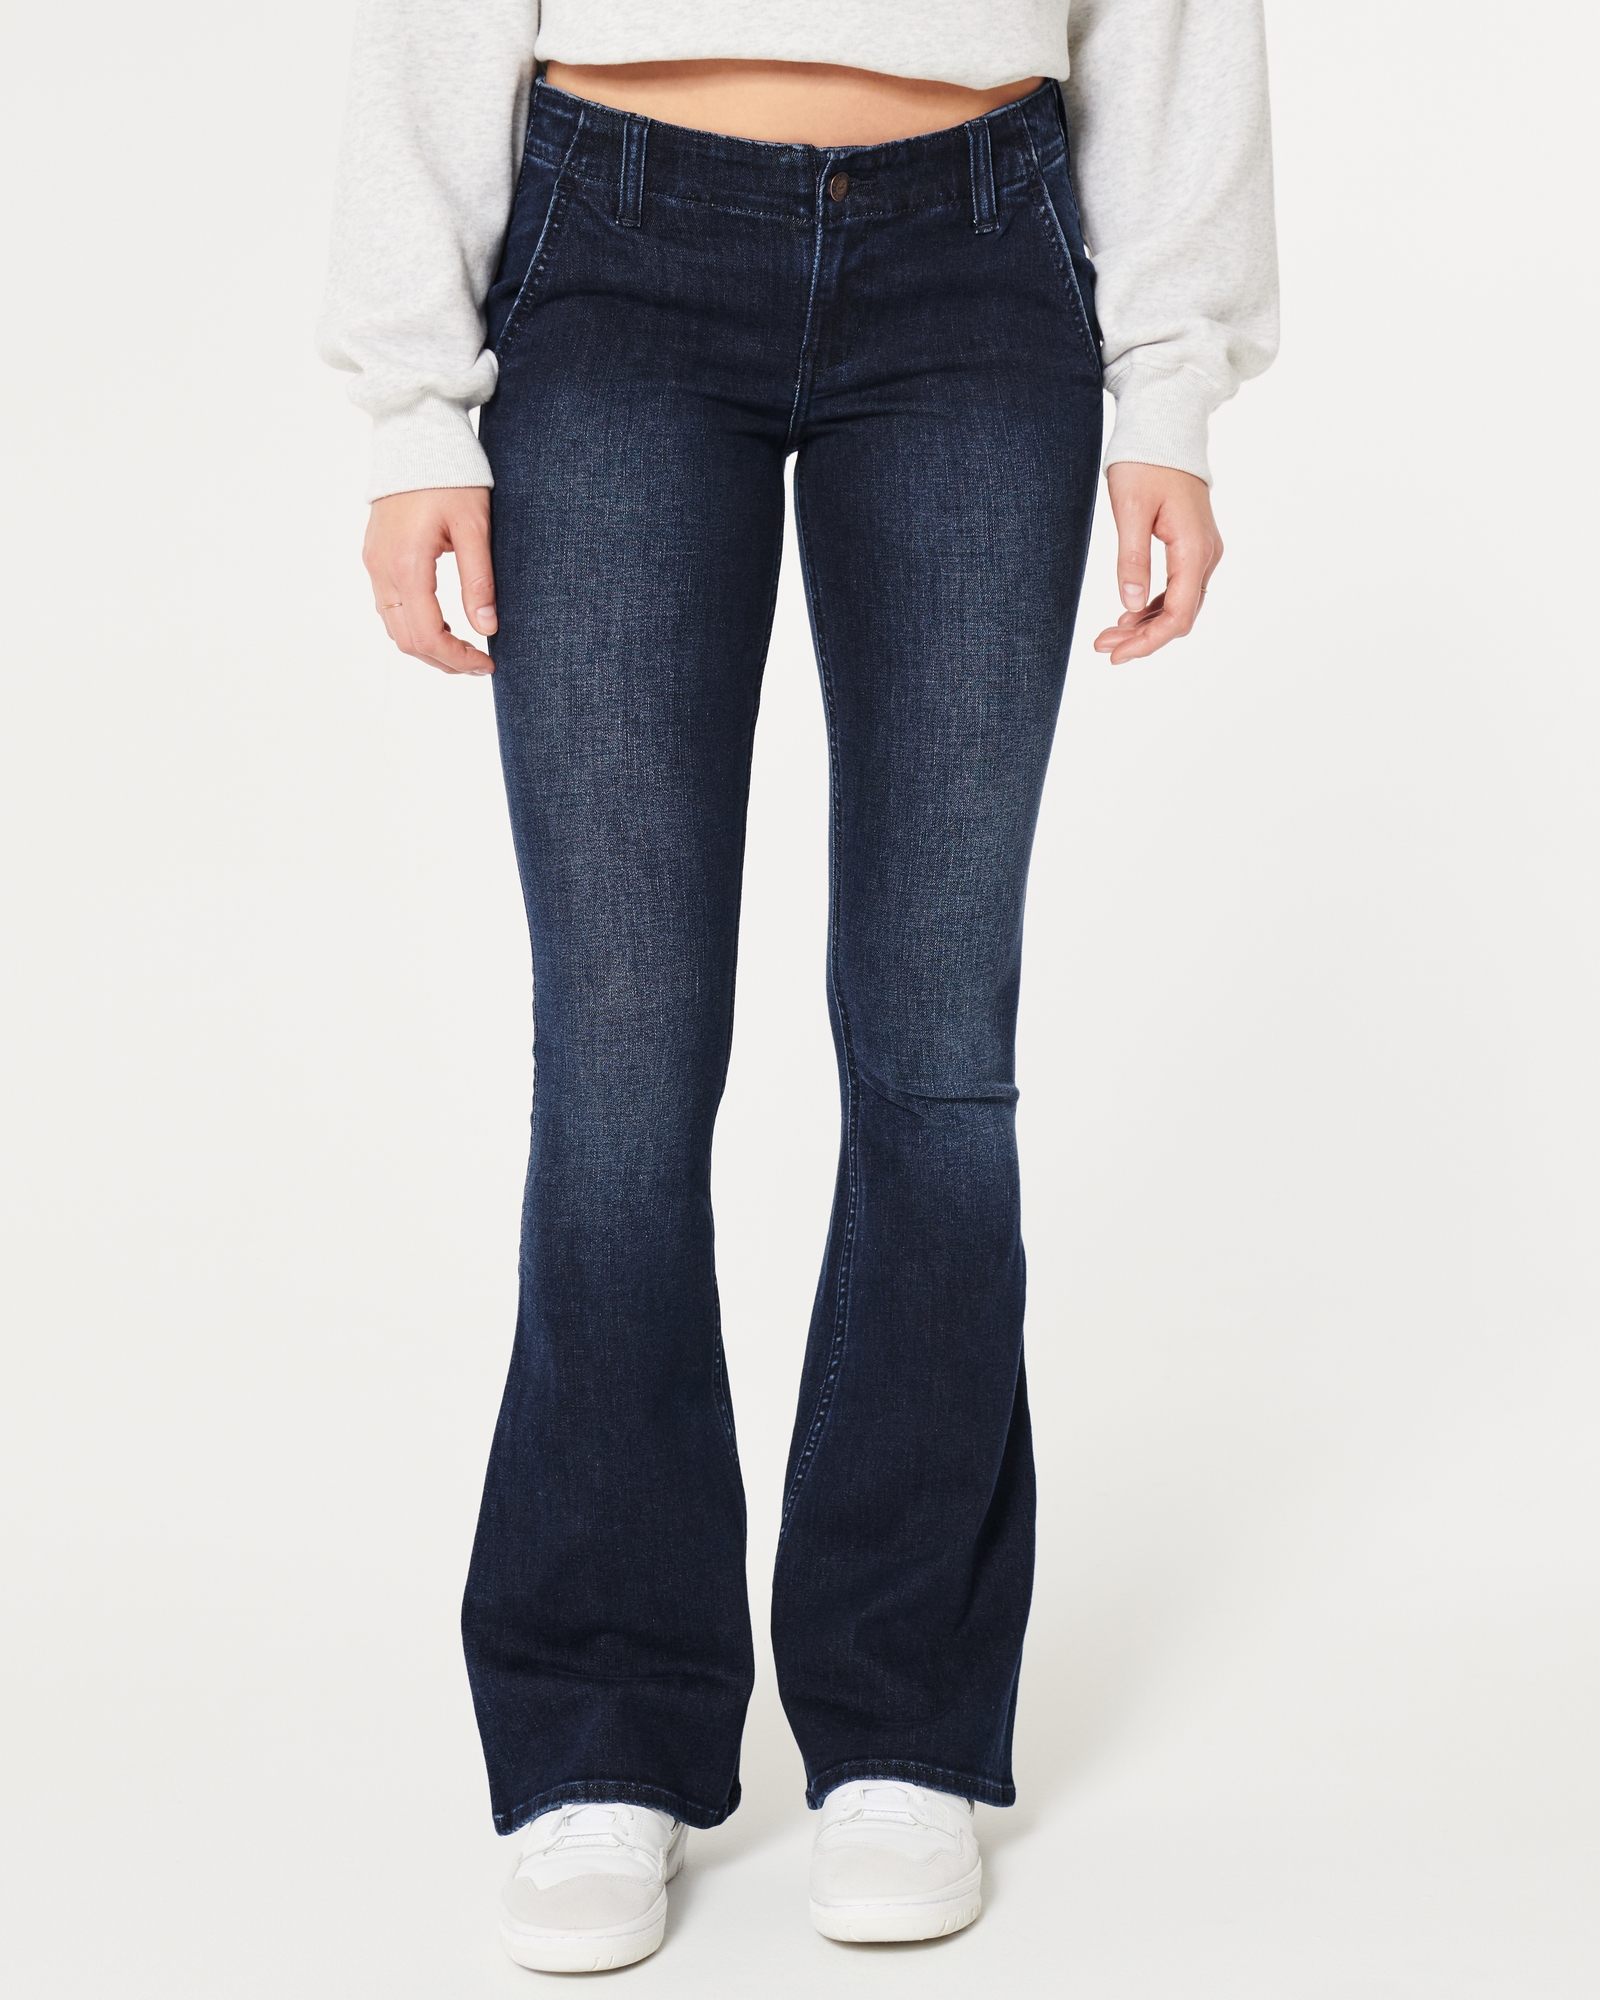 Hollister Flare Jeans for Sale in San Jose, CA - OfferUp